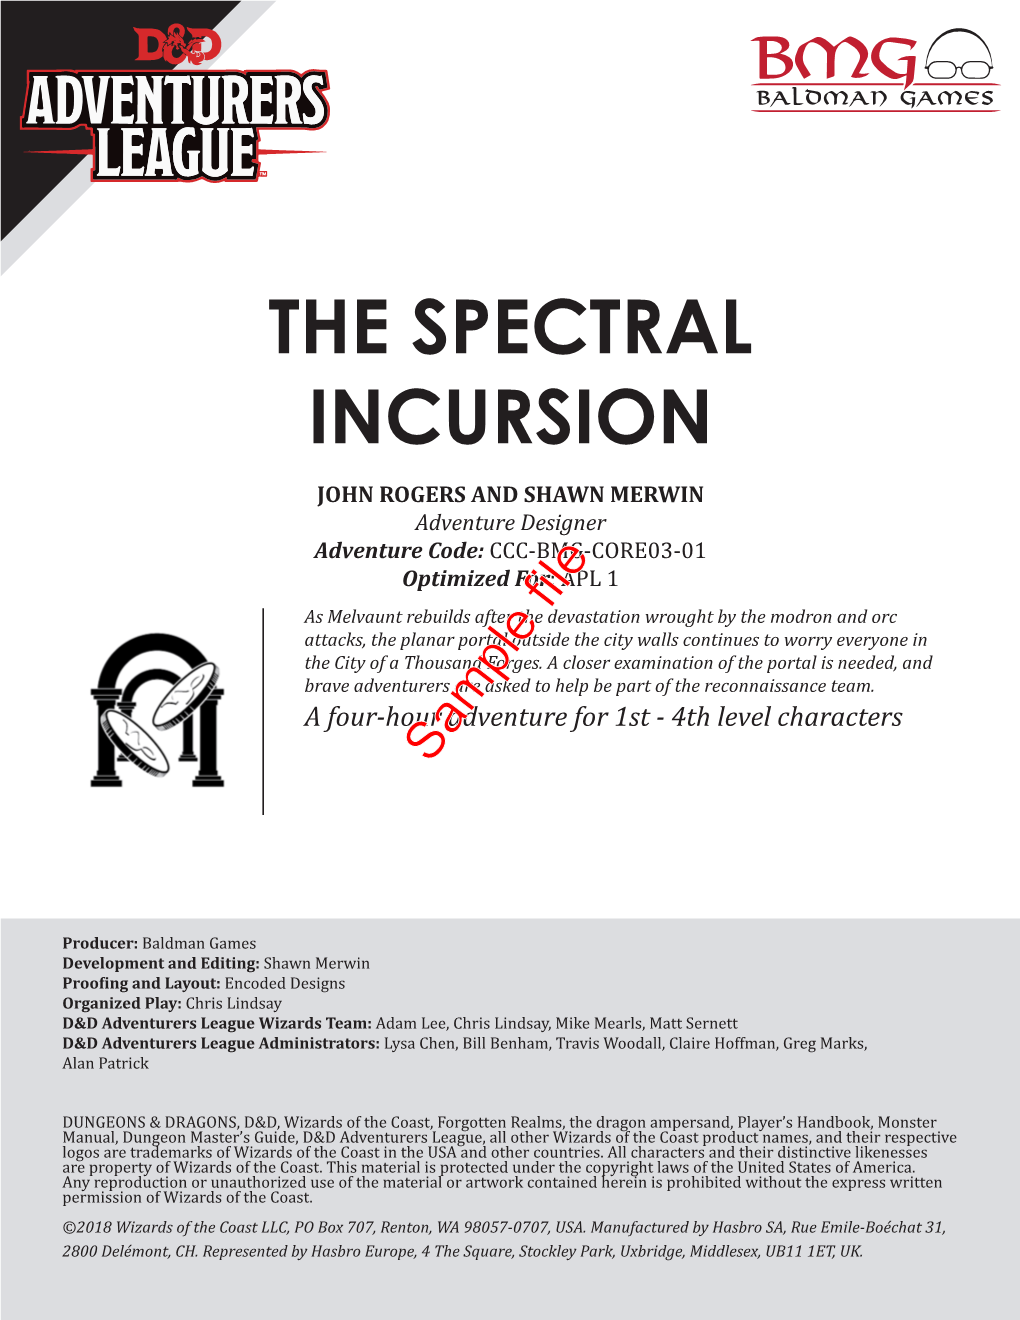 The Spectral Incursion